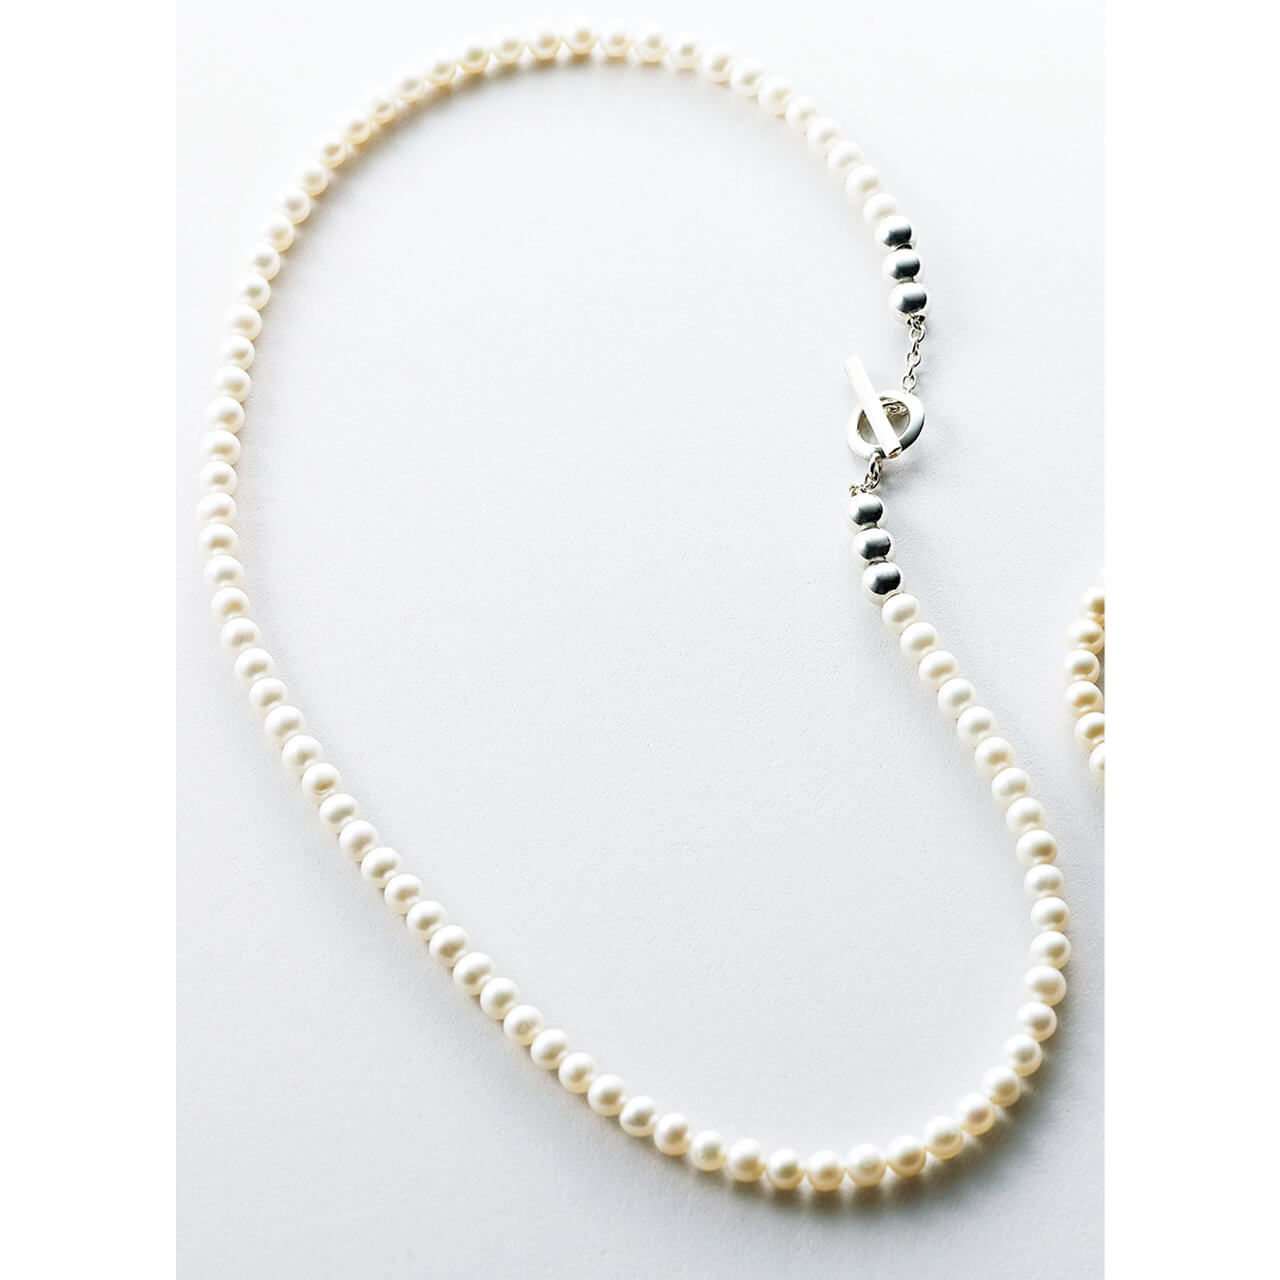 sympathy of soul style（シンパシーオブソウルスタイル） Pearl Beads T-bar Necklace